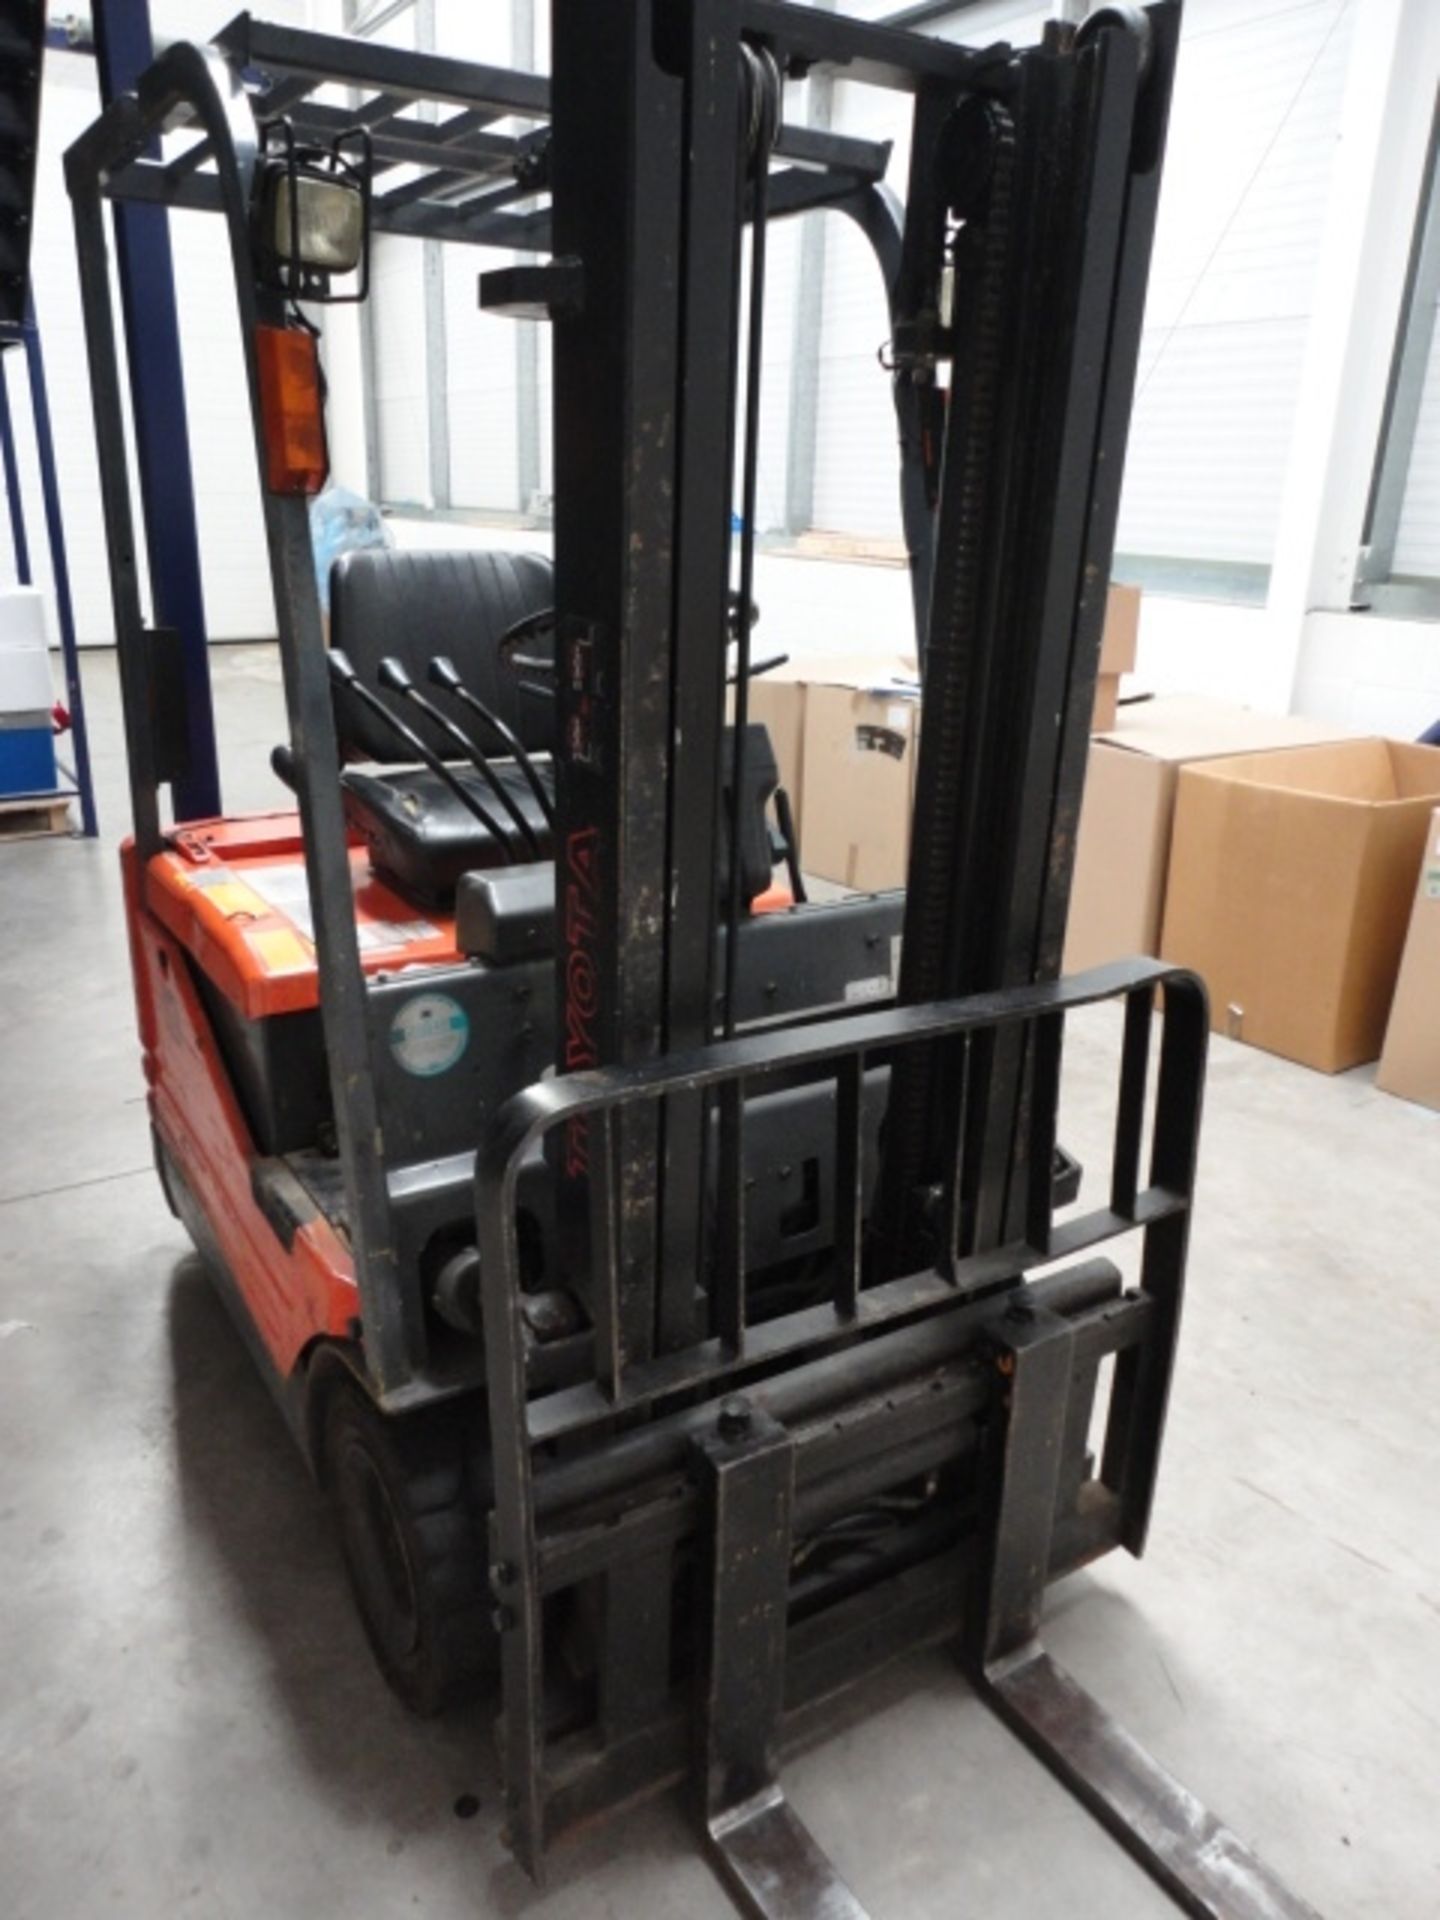 Toyota Fork Lift Truck. capable of 1.25 tonne lift. Elec, MUST BE THE LAST LOT TO LEAVE LIFT OUT £50 - Image 3 of 5